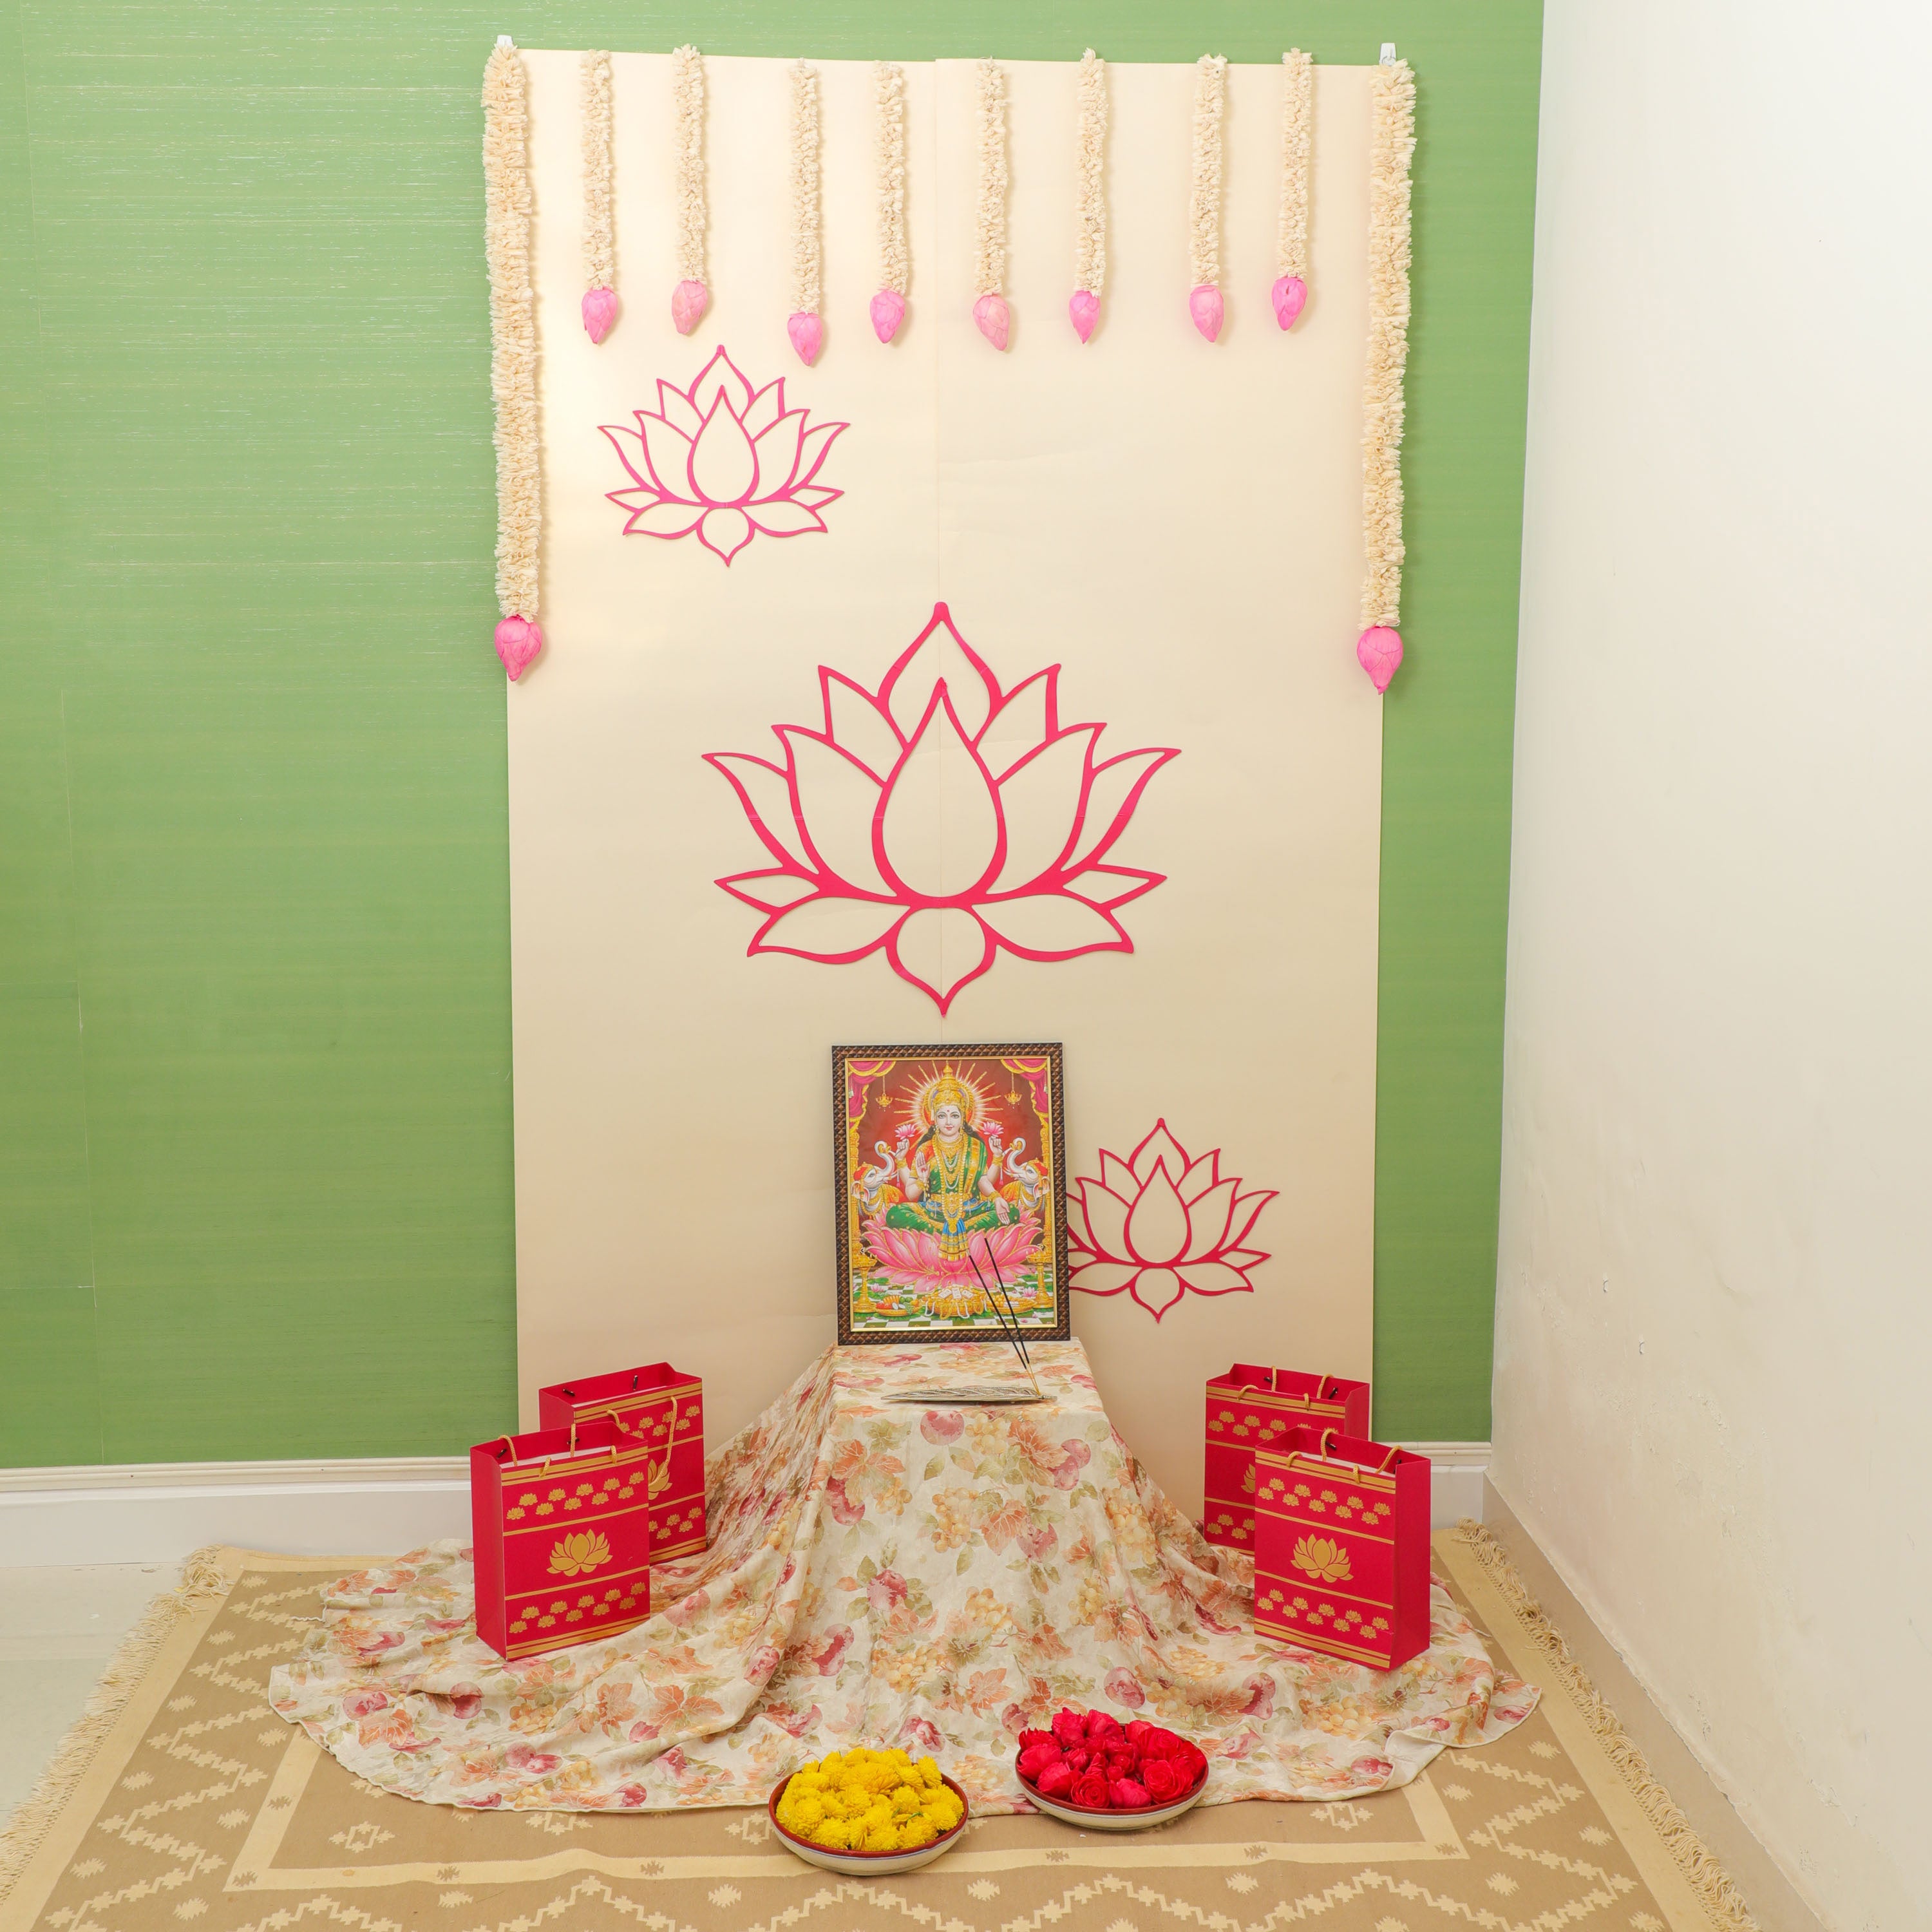 Lotus Cutout Backdrop Kit for sale in the USA